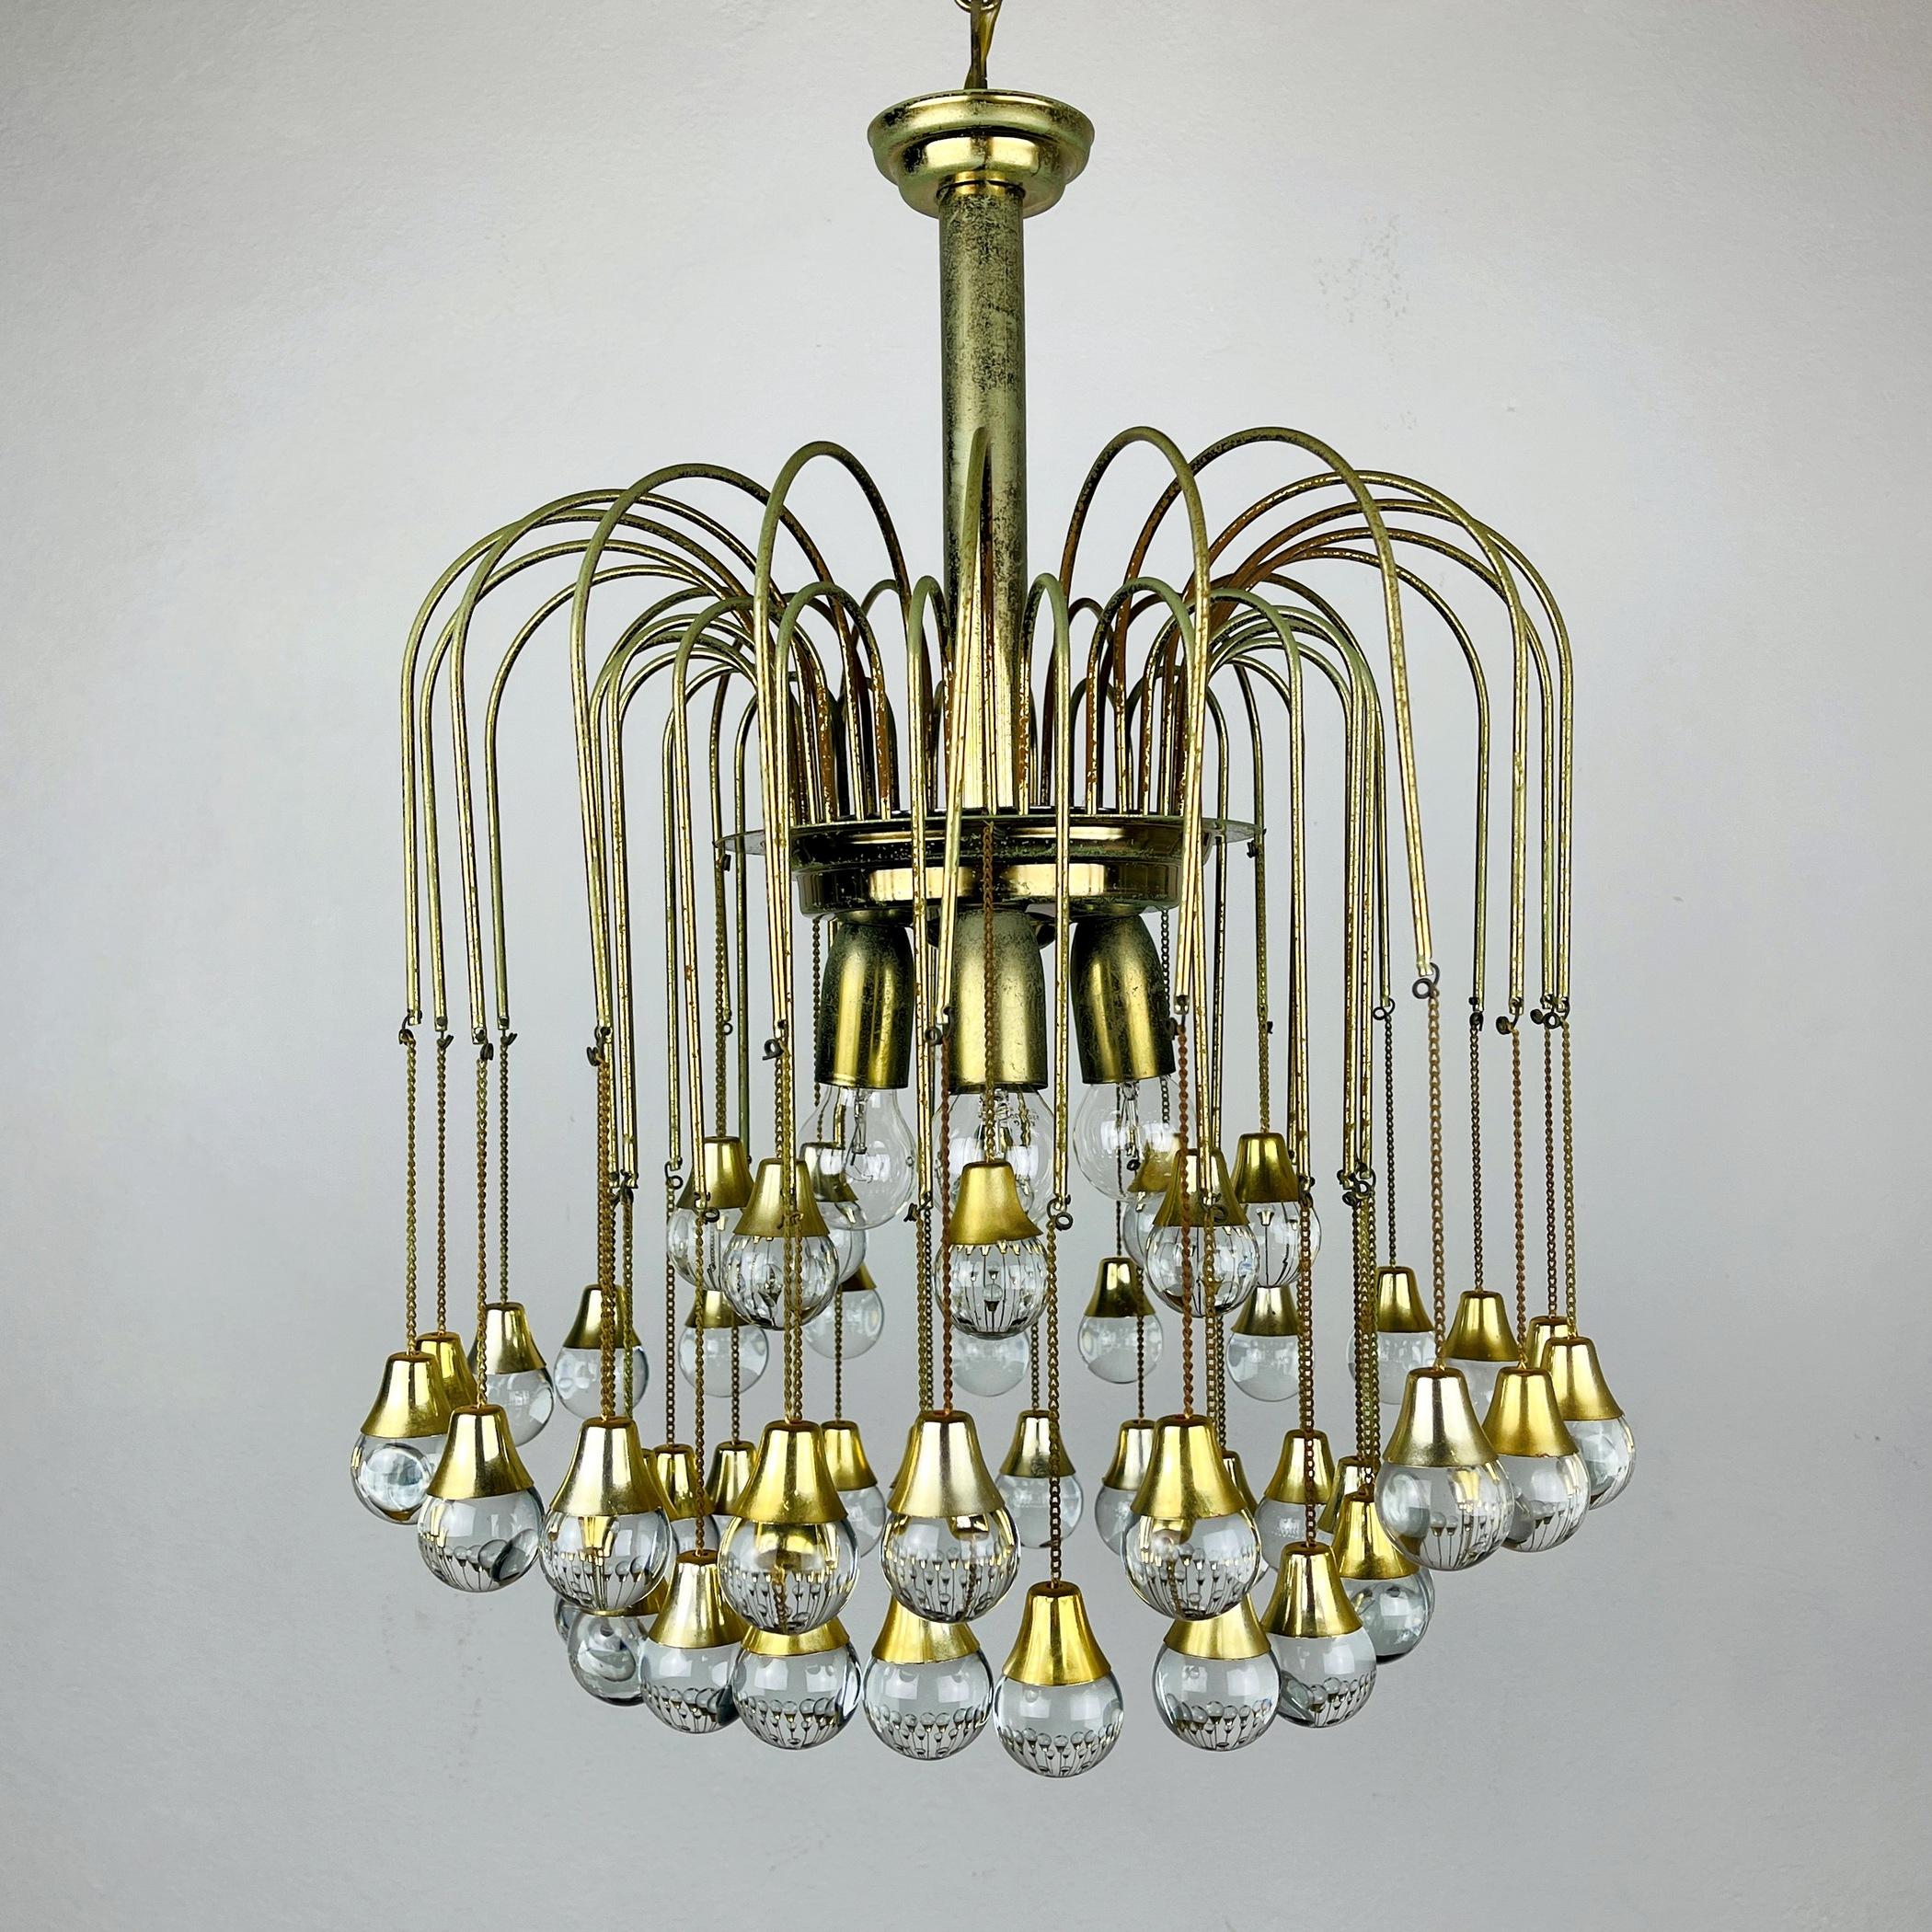 Vintage Cascade Glass Chandelier Italy 1960s Brass and 48 Glass Balls 10